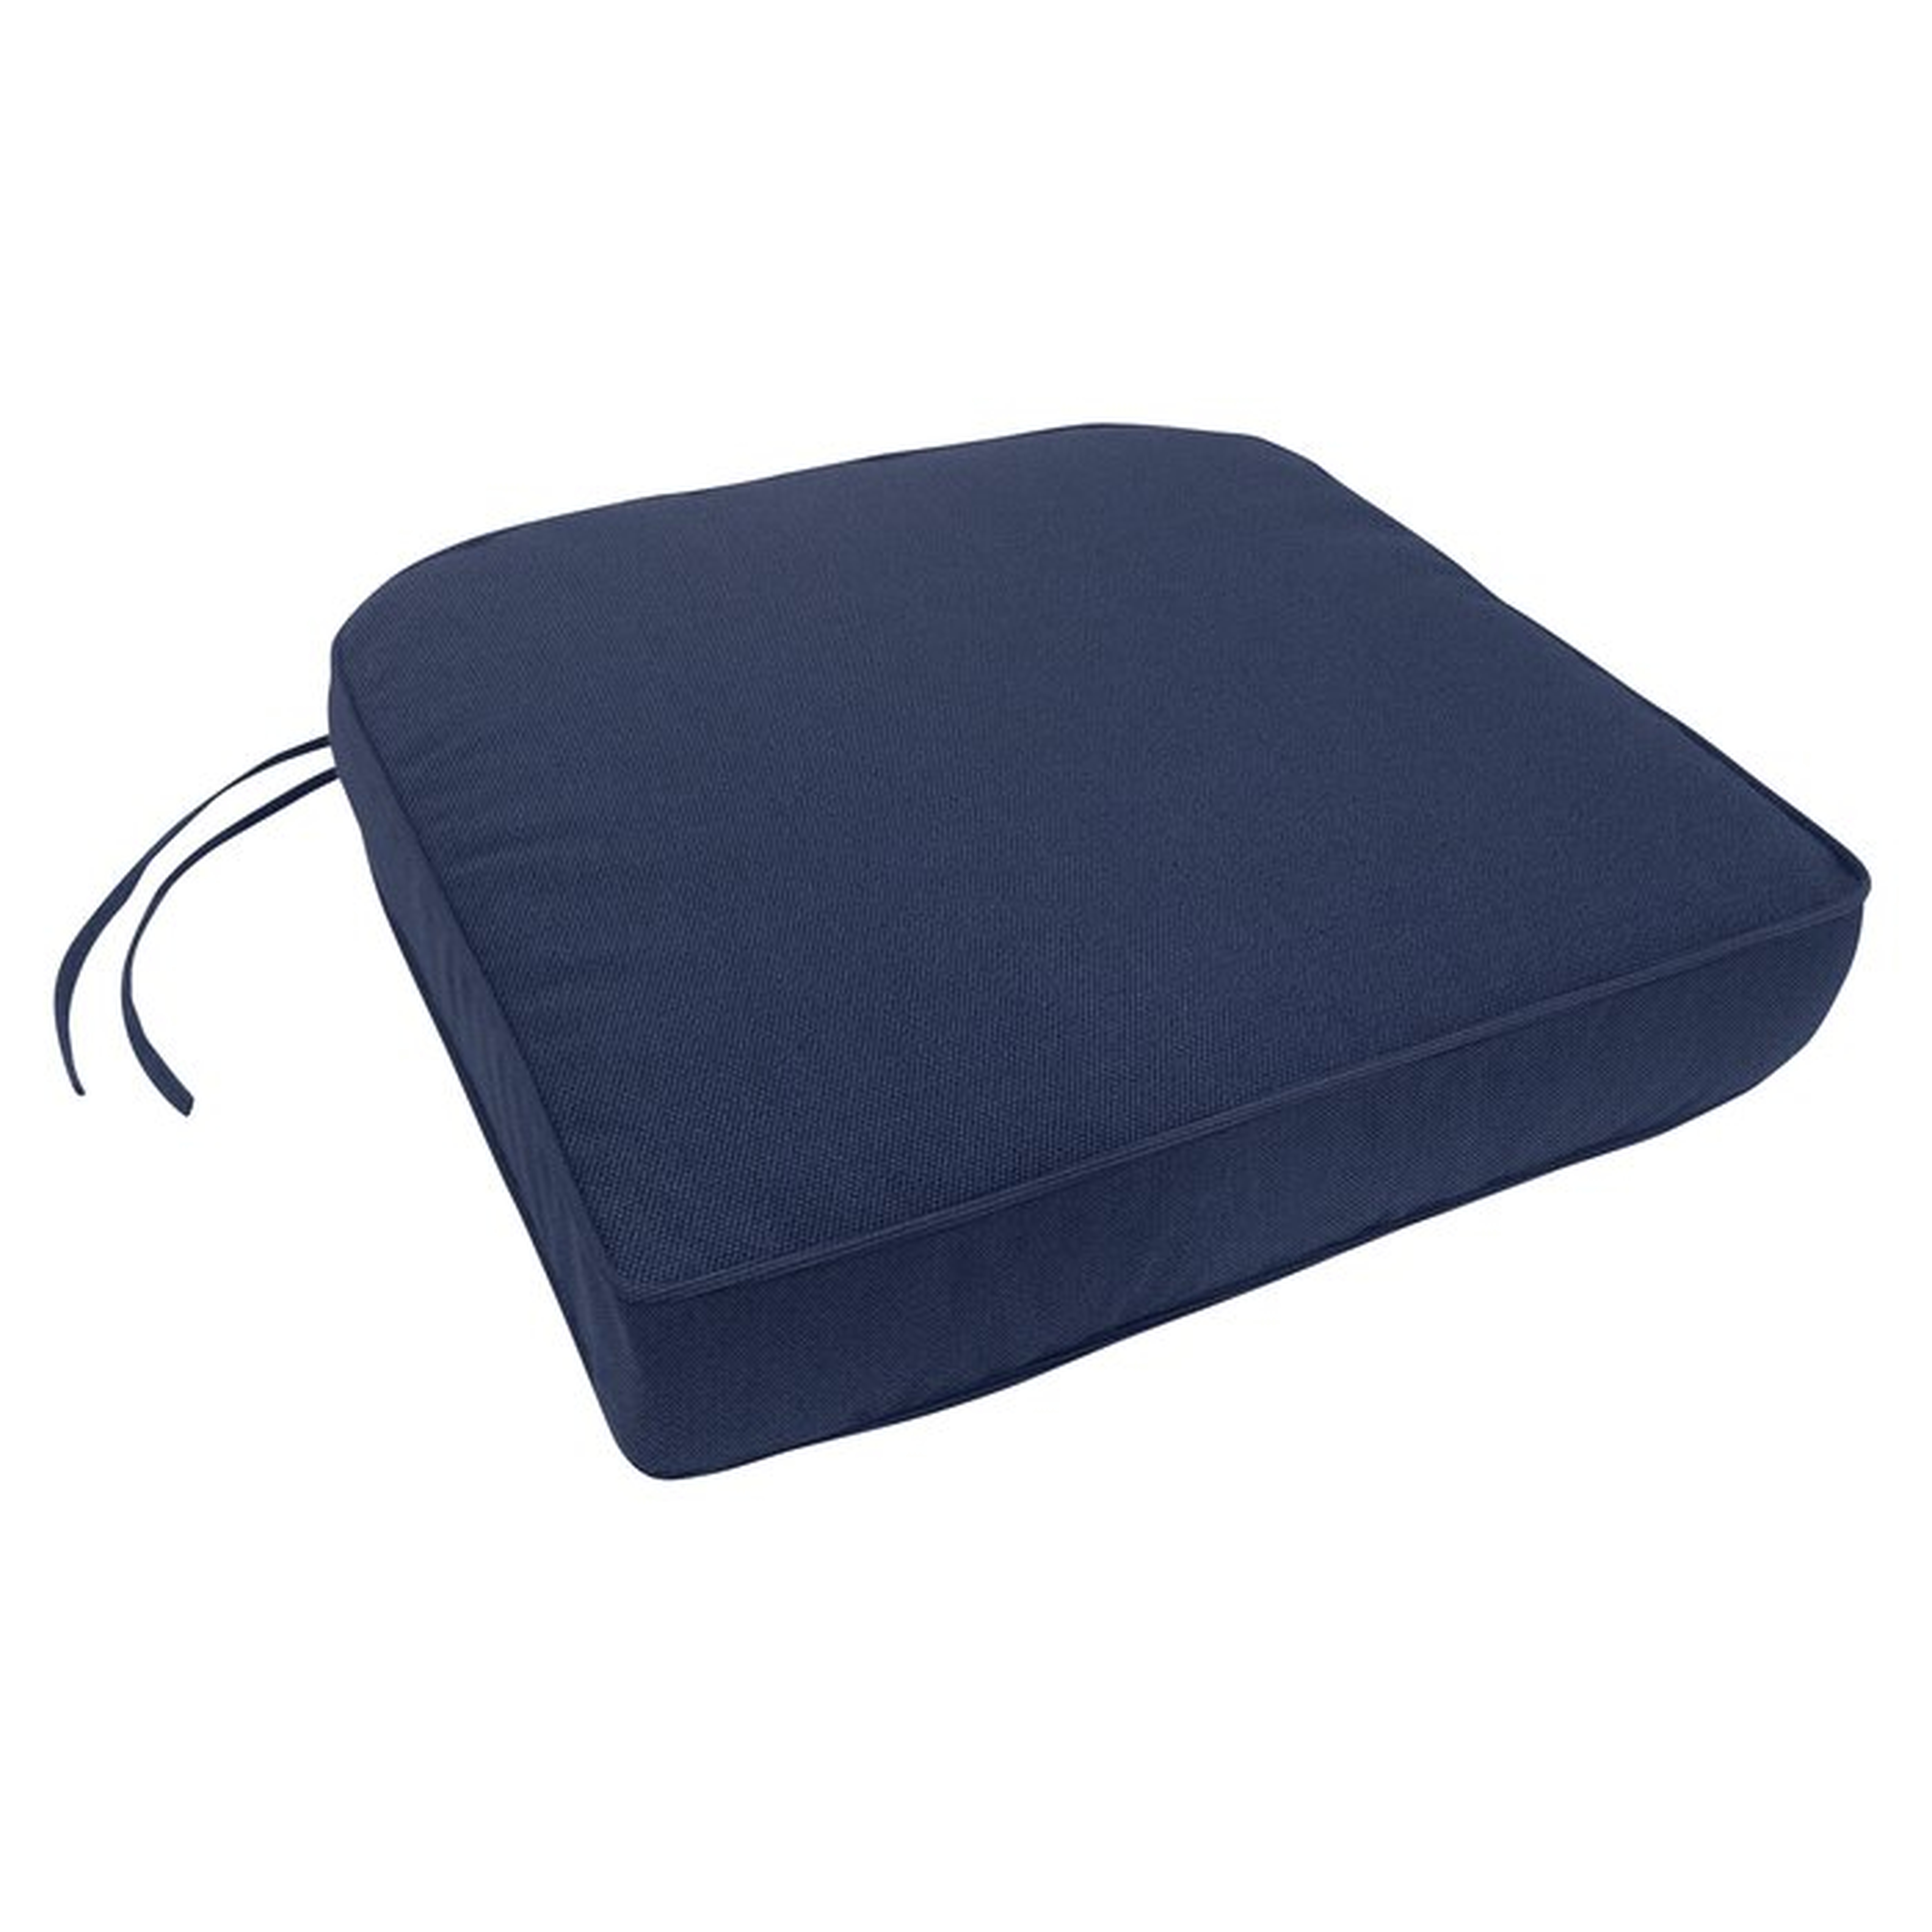 Double-Piped Indoor/Outdoor Sunbrella Contour Chair Cushion with Ties and Zipper - Wayfair